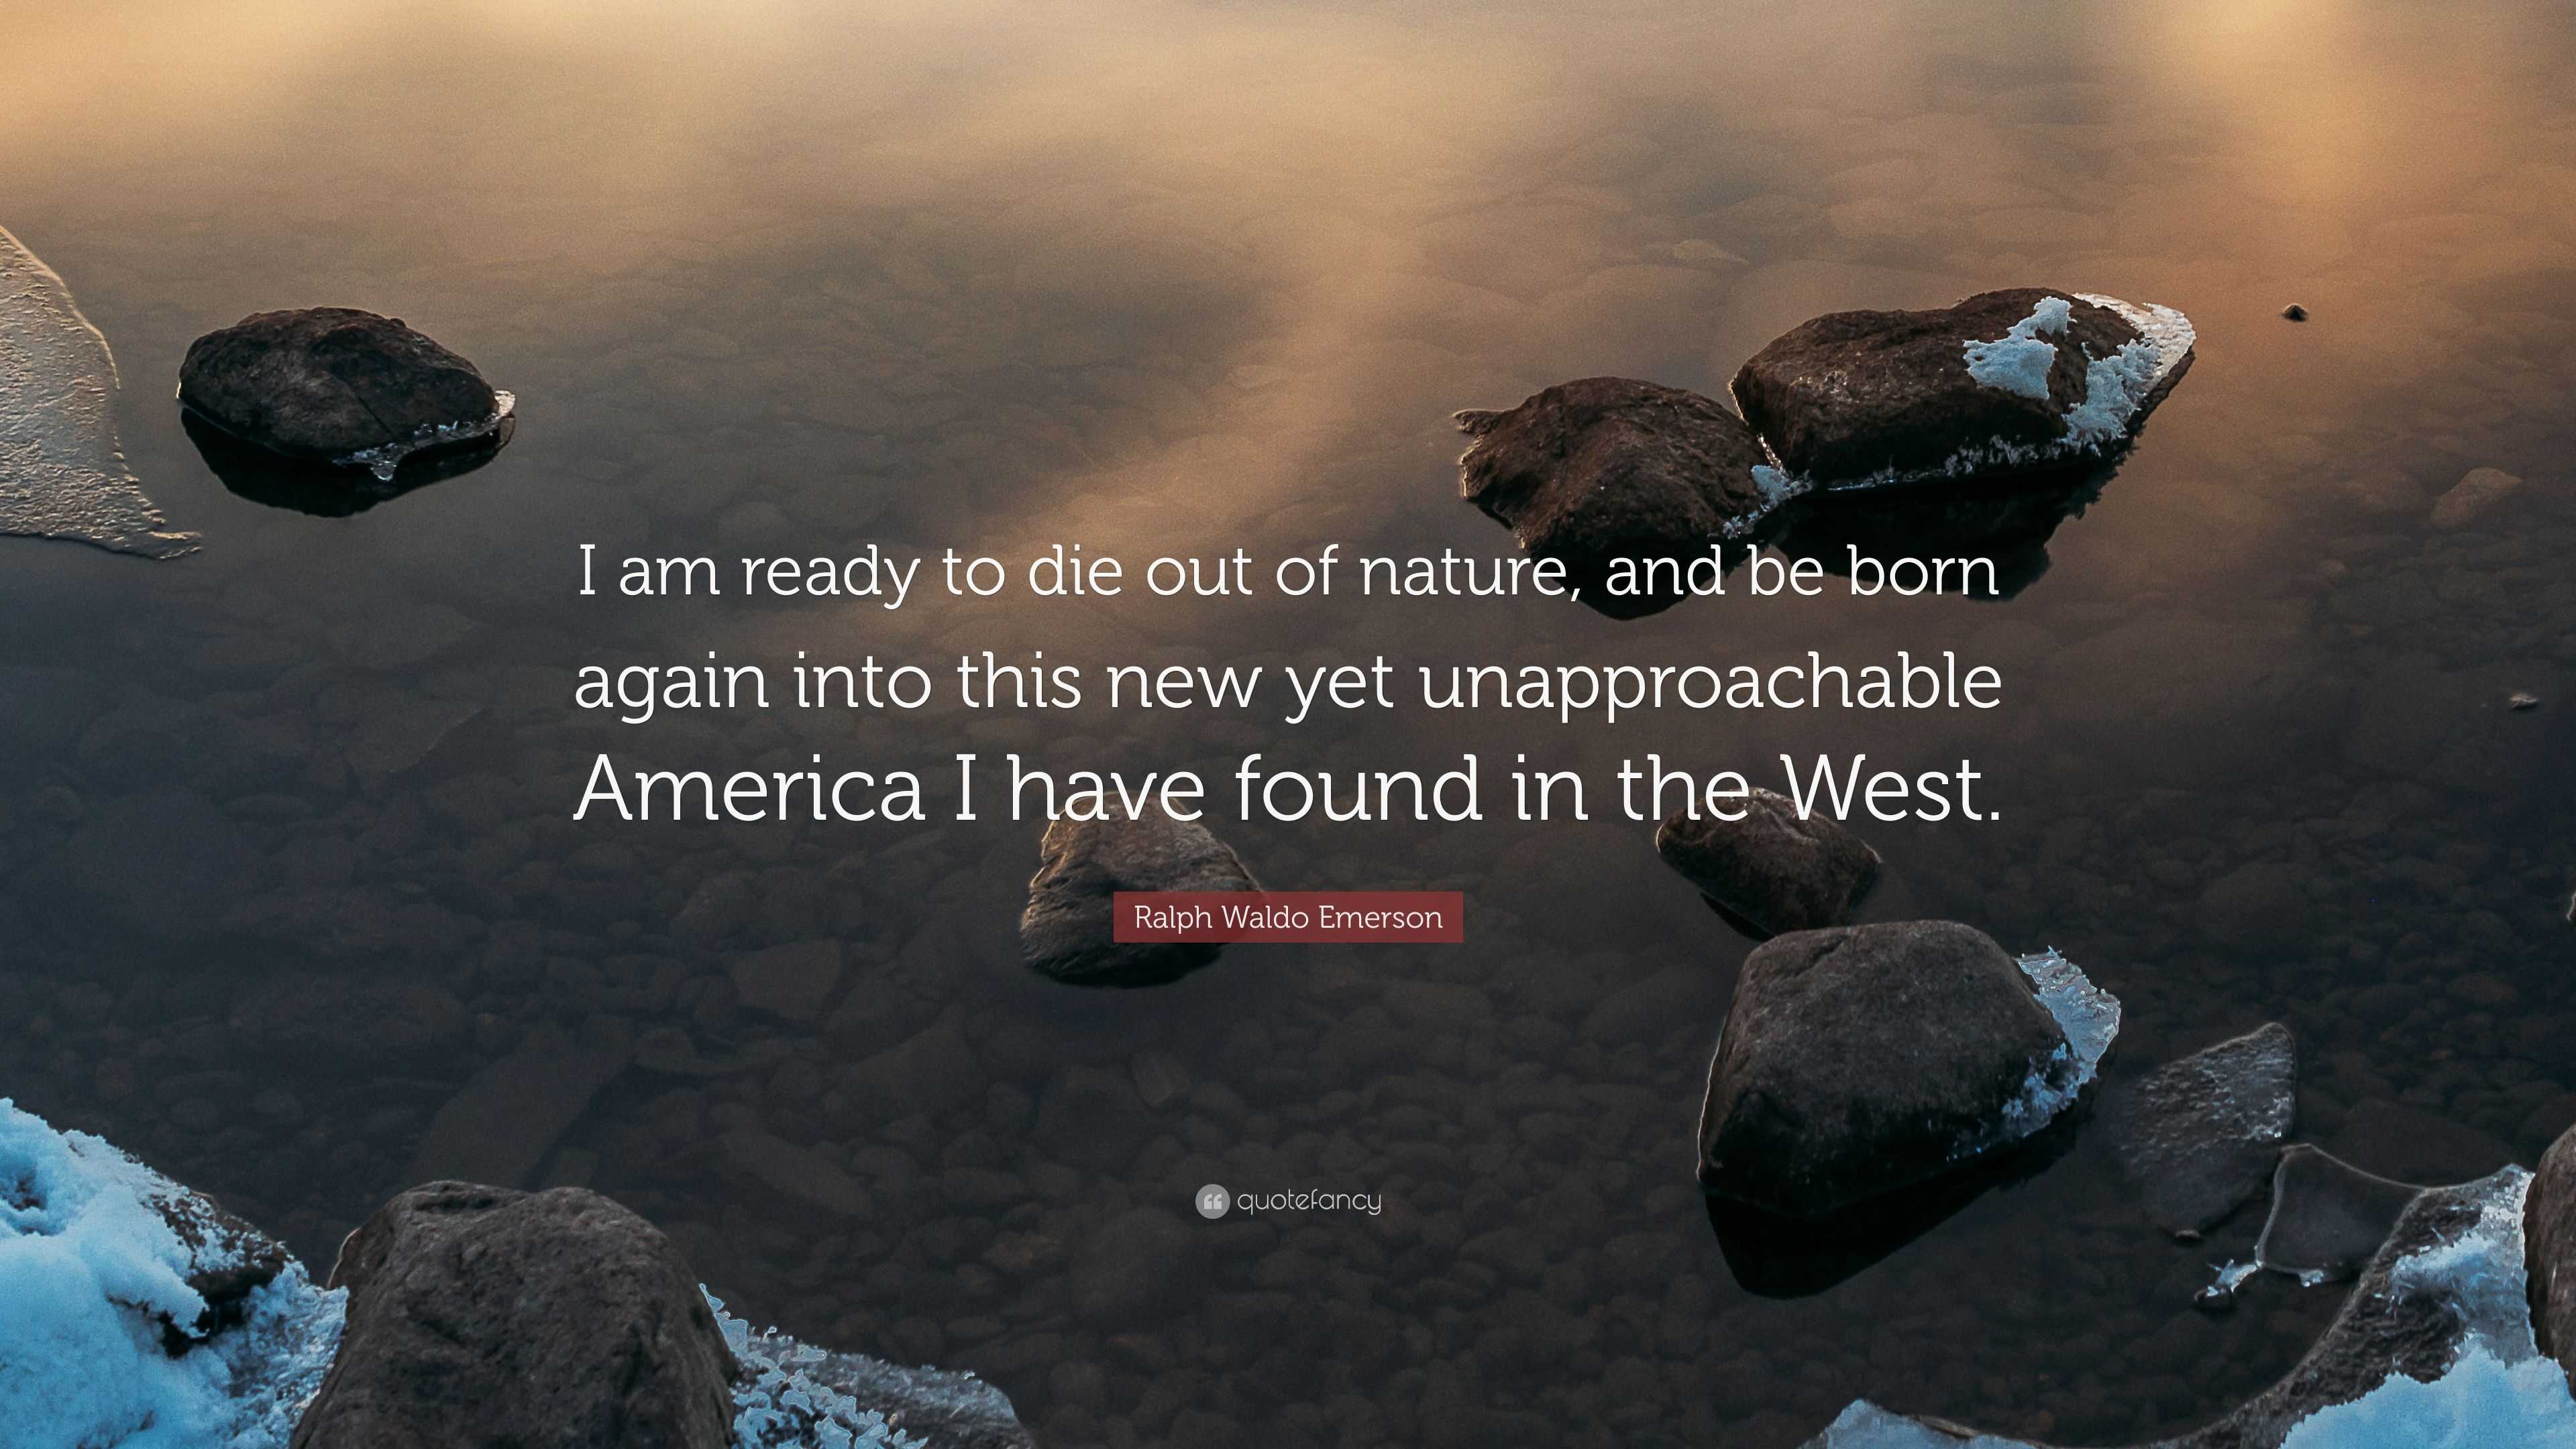 https://quotefancy.com/media/wallpaper/3840x2160/4245757-Ralph-Waldo-Emerson-Quote-I-am-ready-to-die-out-of-nature-and-be.jpg